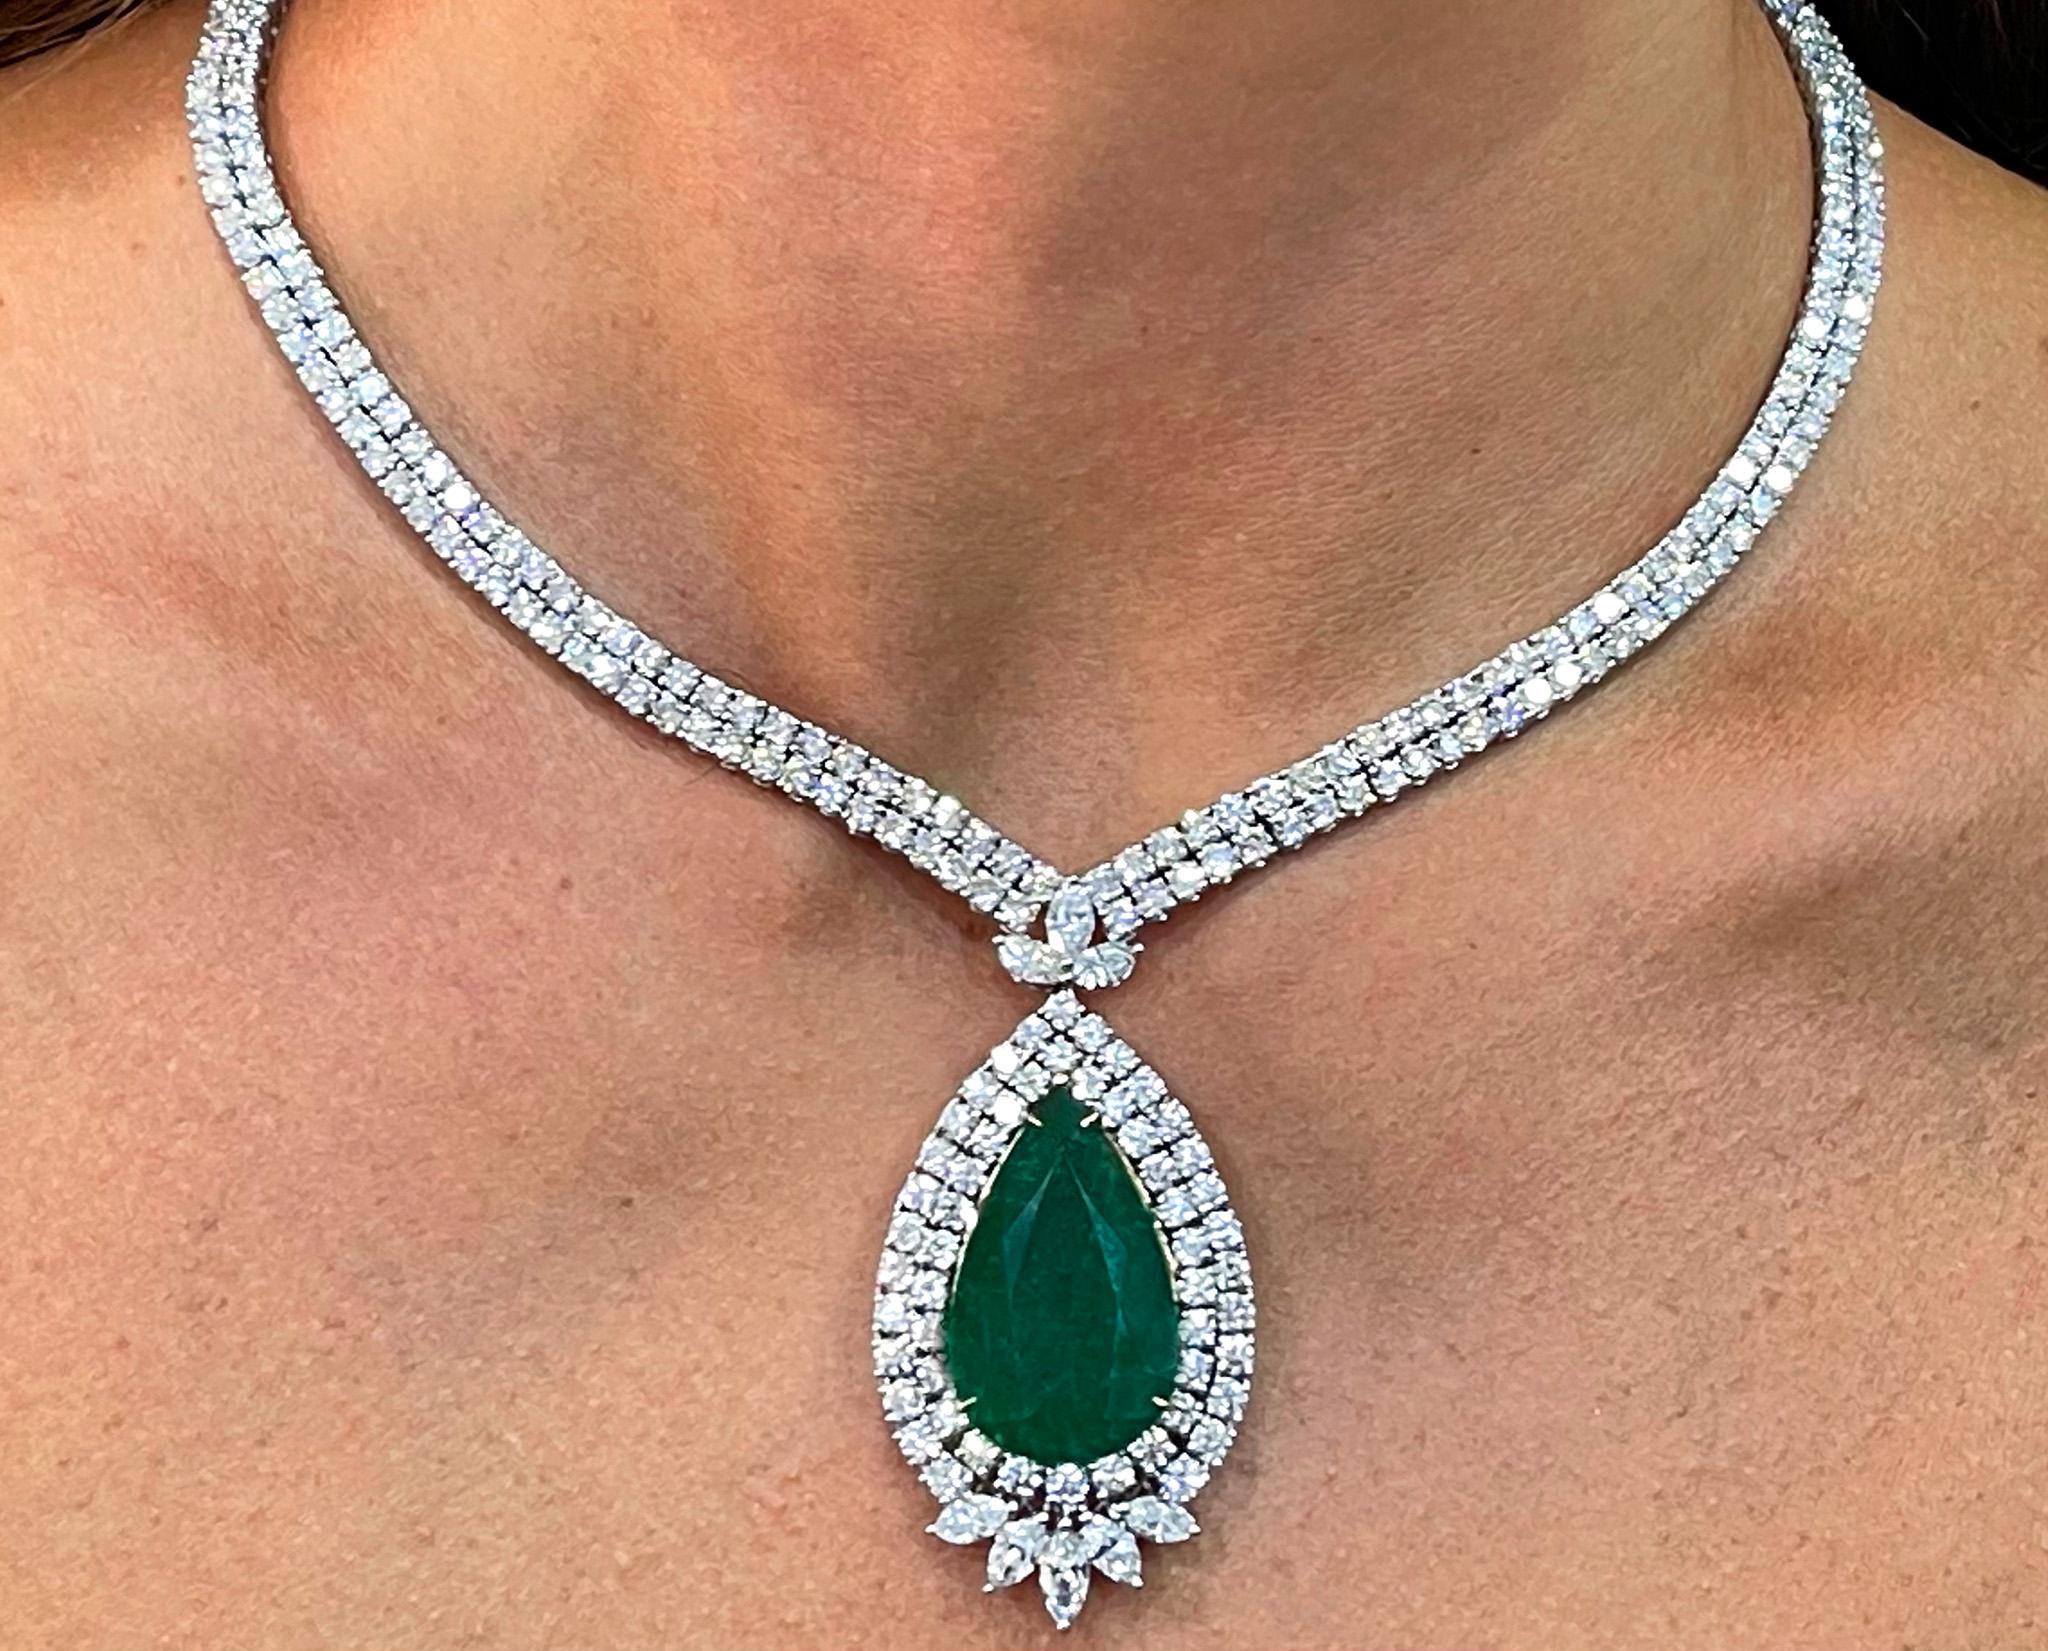 The pendant was made from 18K White Gold and set with Diamonds. The centerpiece is a Very Important Pear Emerald. It comes with an appraisal by GIA G.G.
Pear Emerald = 27.15 Carat
Total Carat Weight of Diamonds is 24.87 Carats
Diamonds Color is